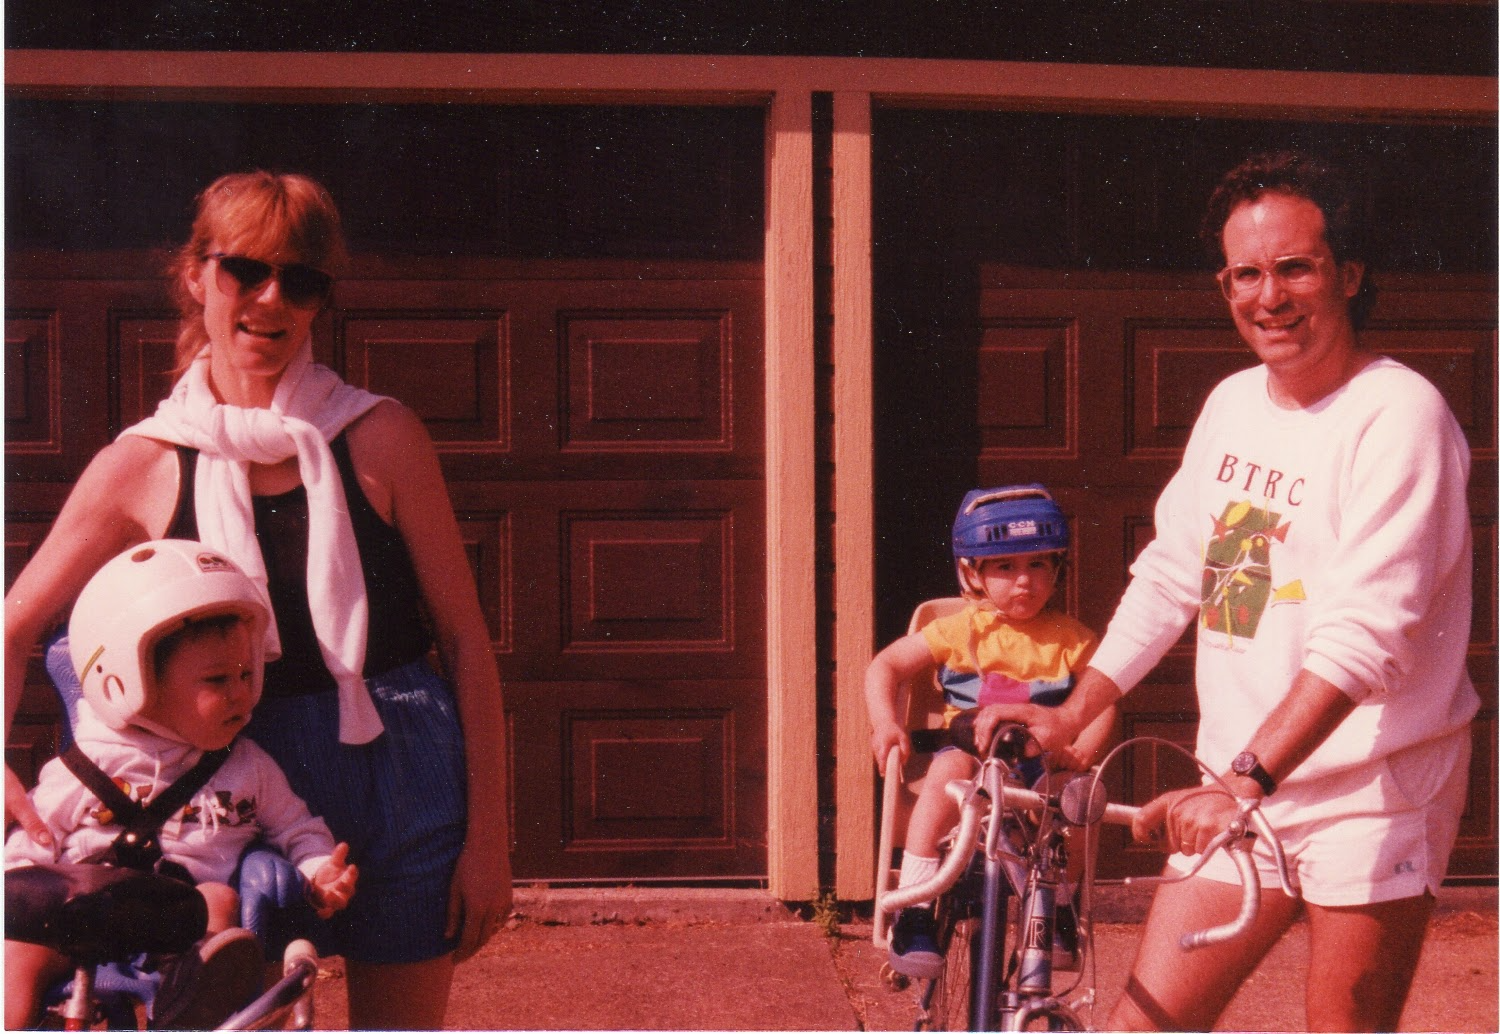 The author's immediate family in front of their garage, getting ready for a bike ride.